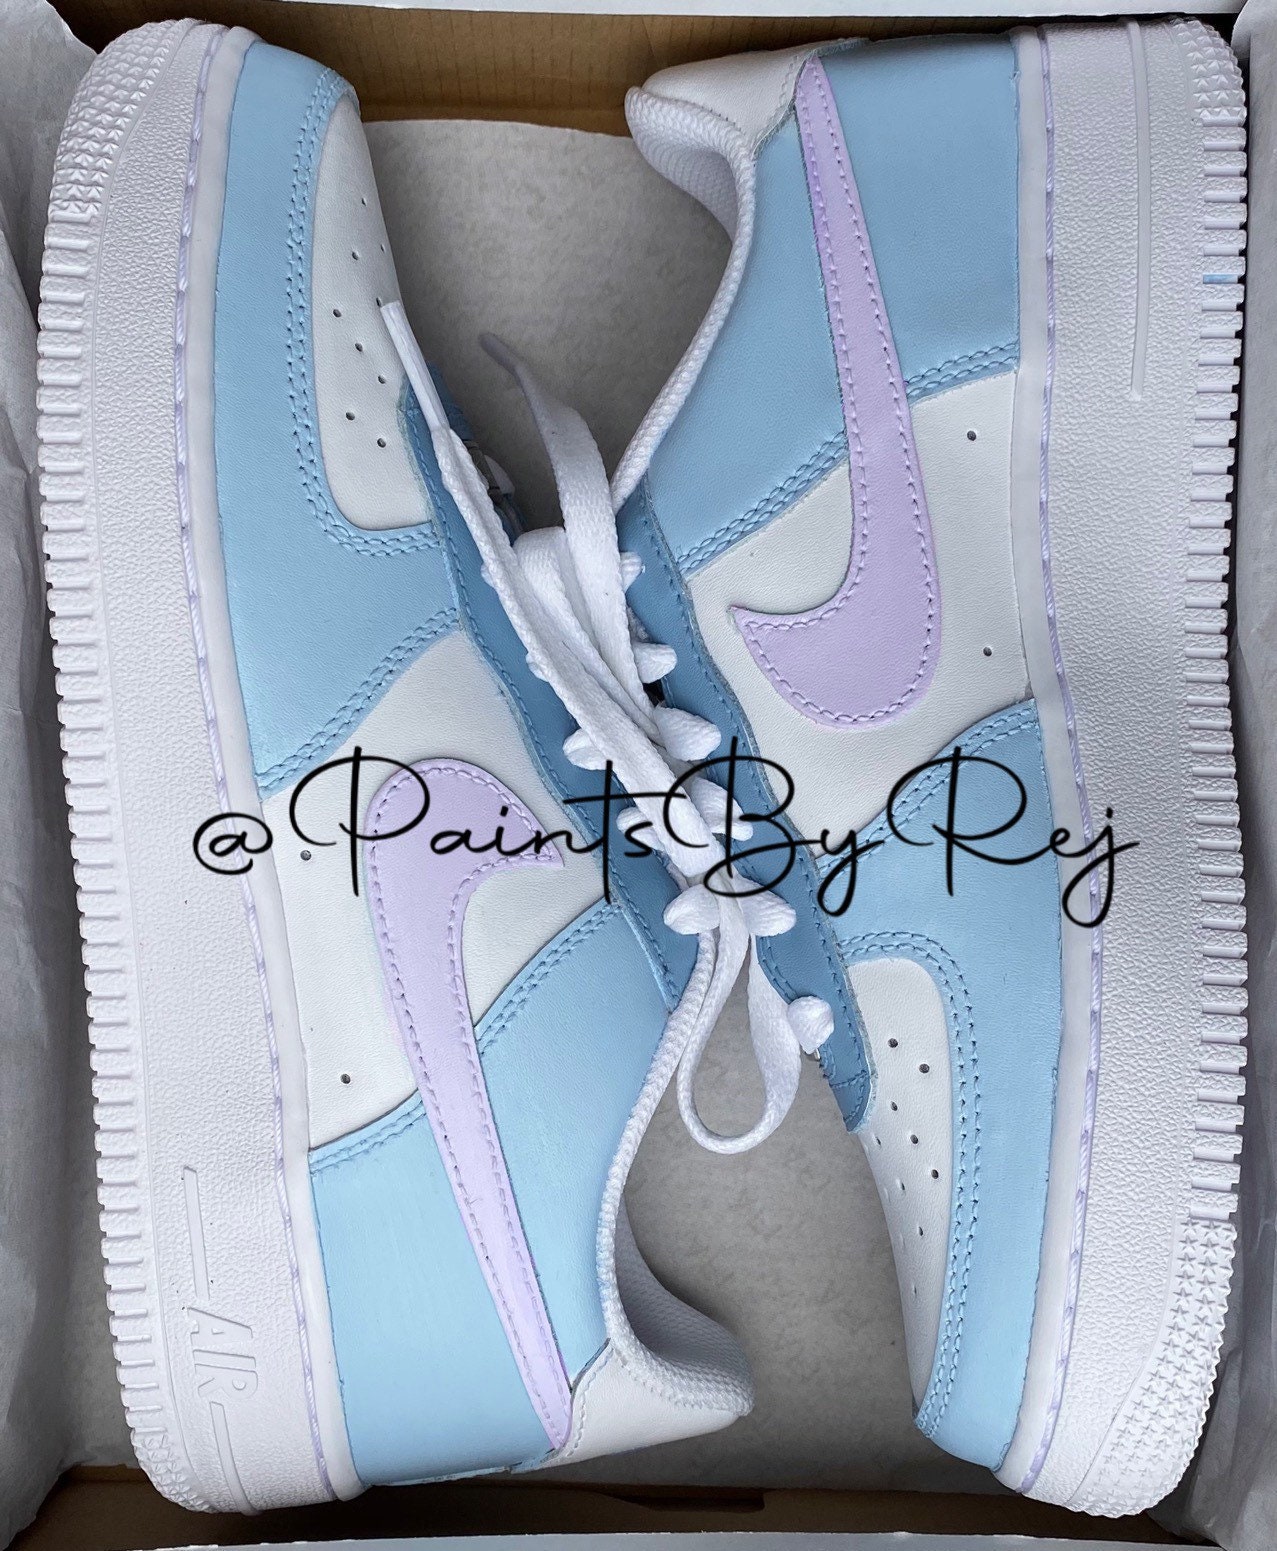 white air force with purple tick